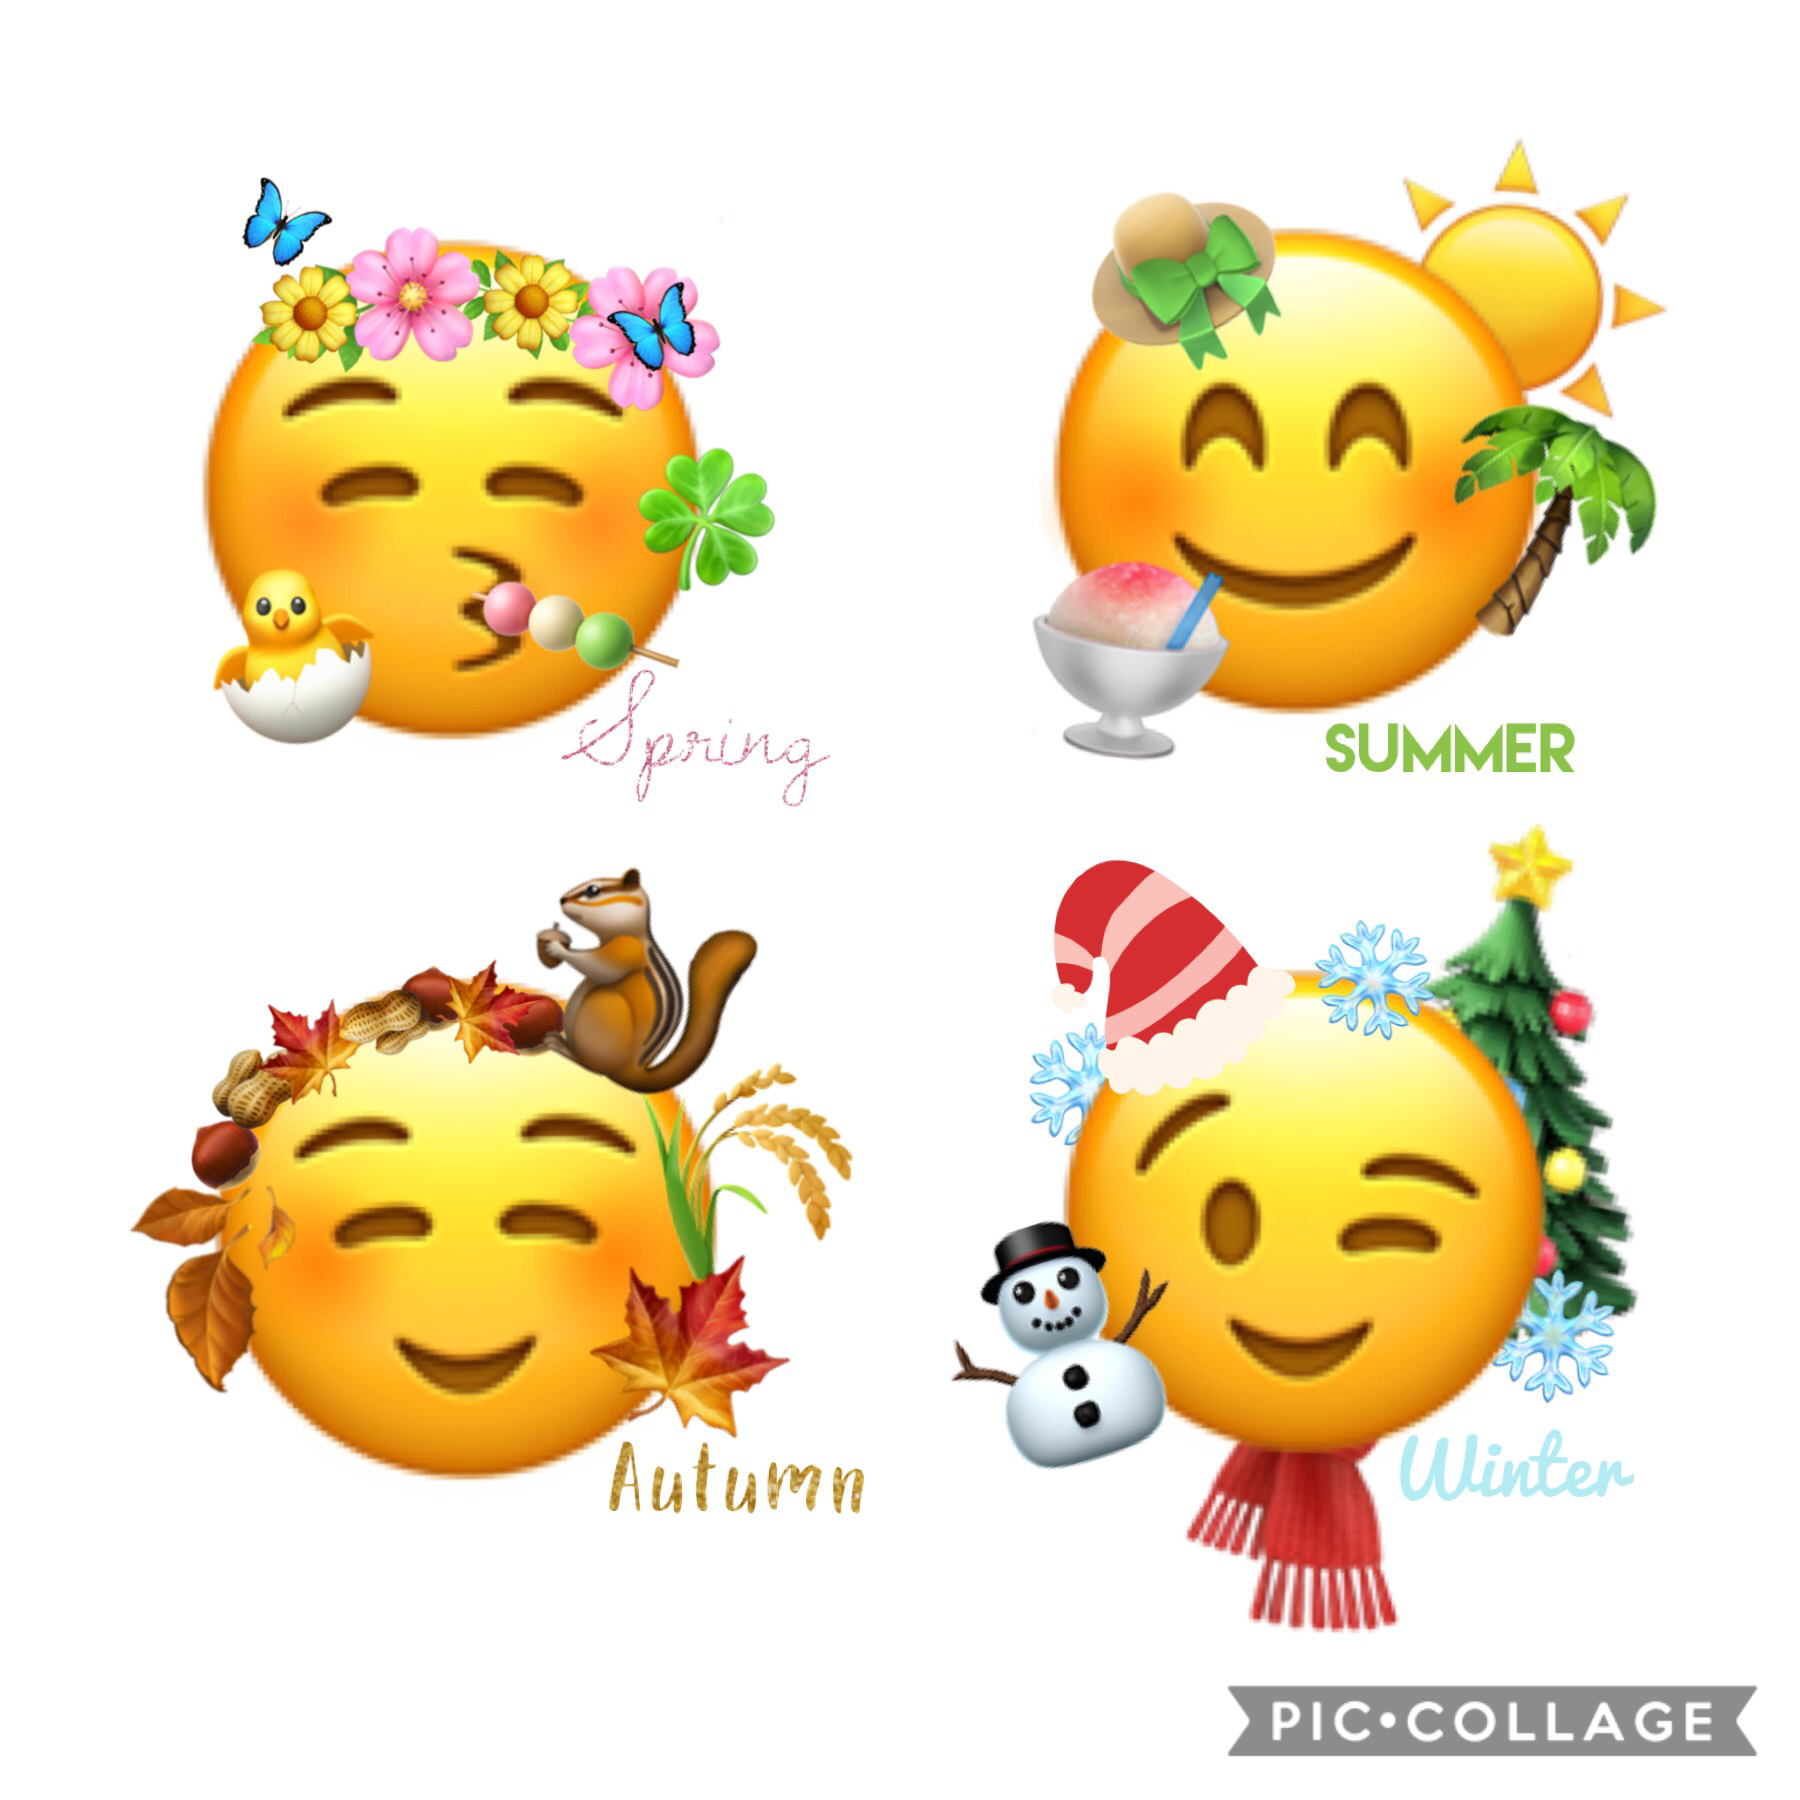 The new emojis I made 🙂😛I was just bored 😑 which one do you like the most?👍